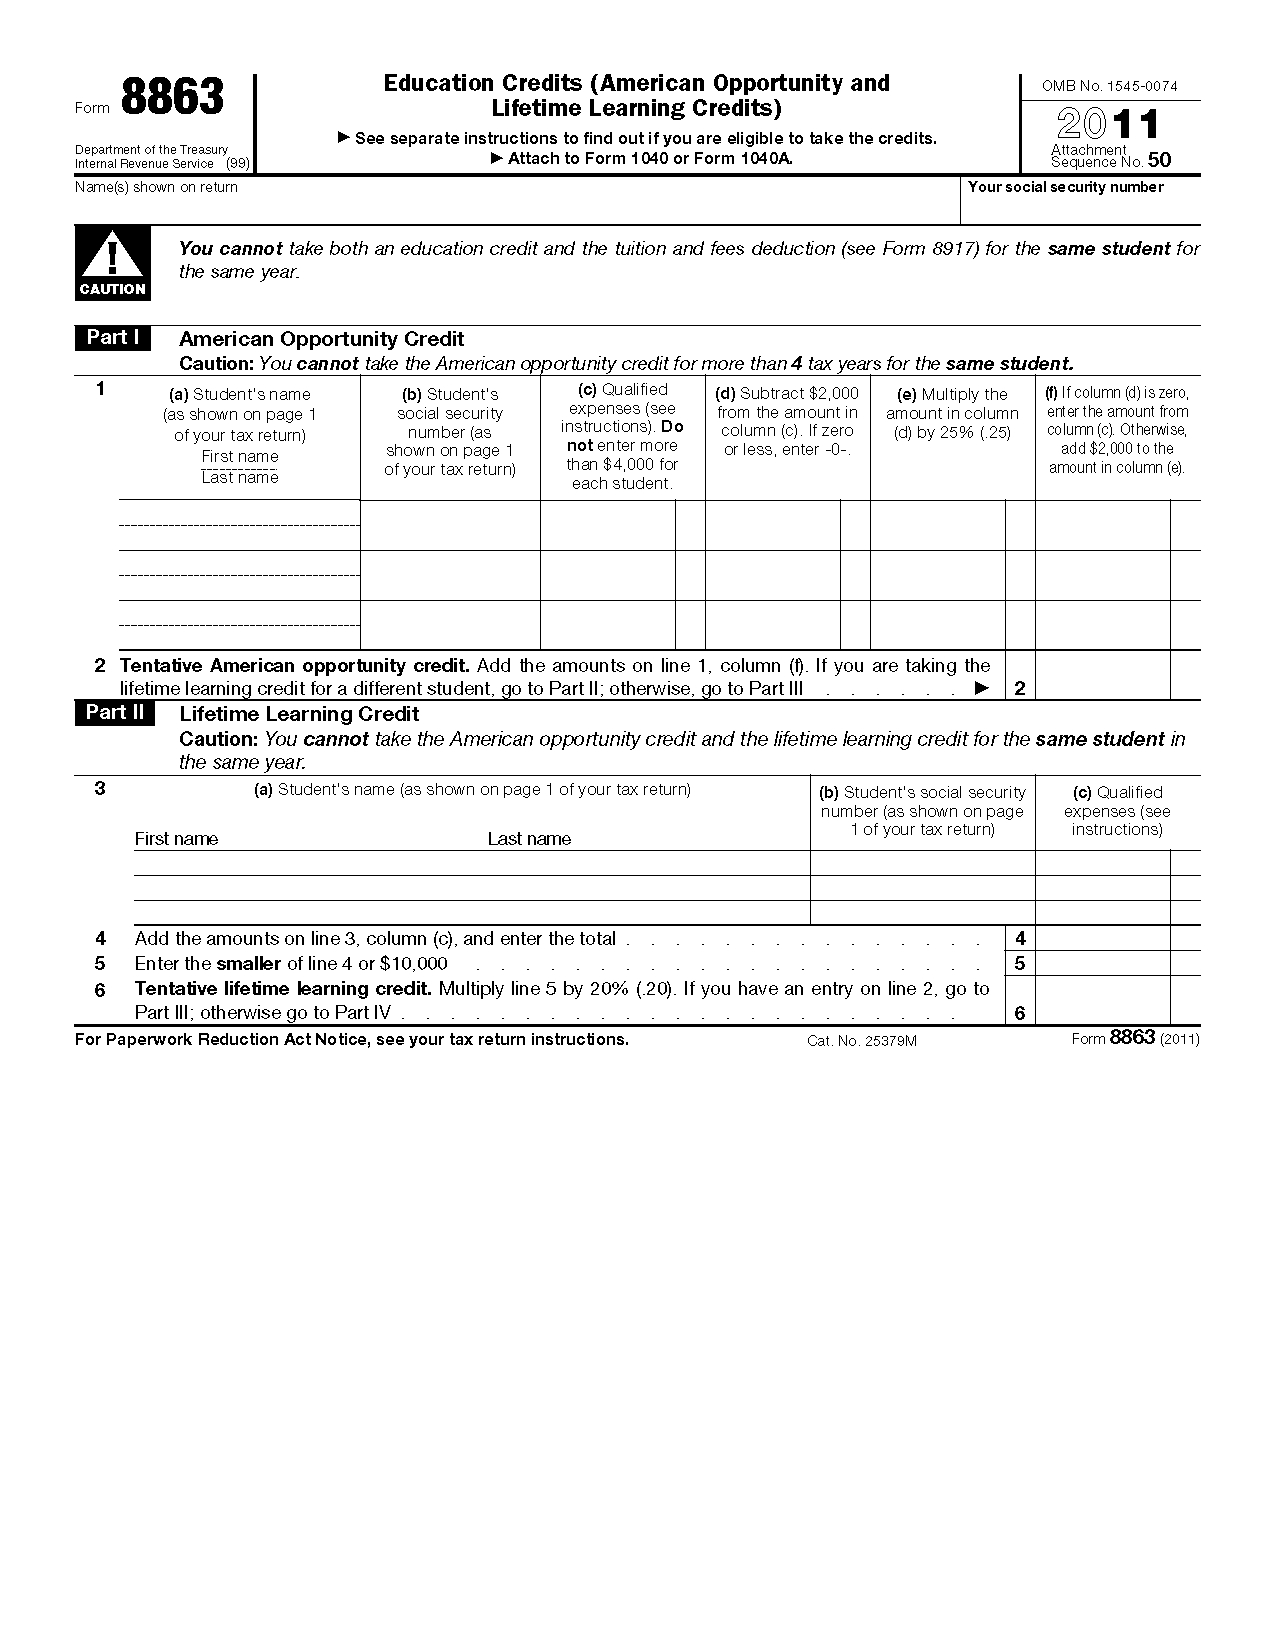 Tax Form 8863 Federal For 2016 Instructions 2015 2018 db excel com